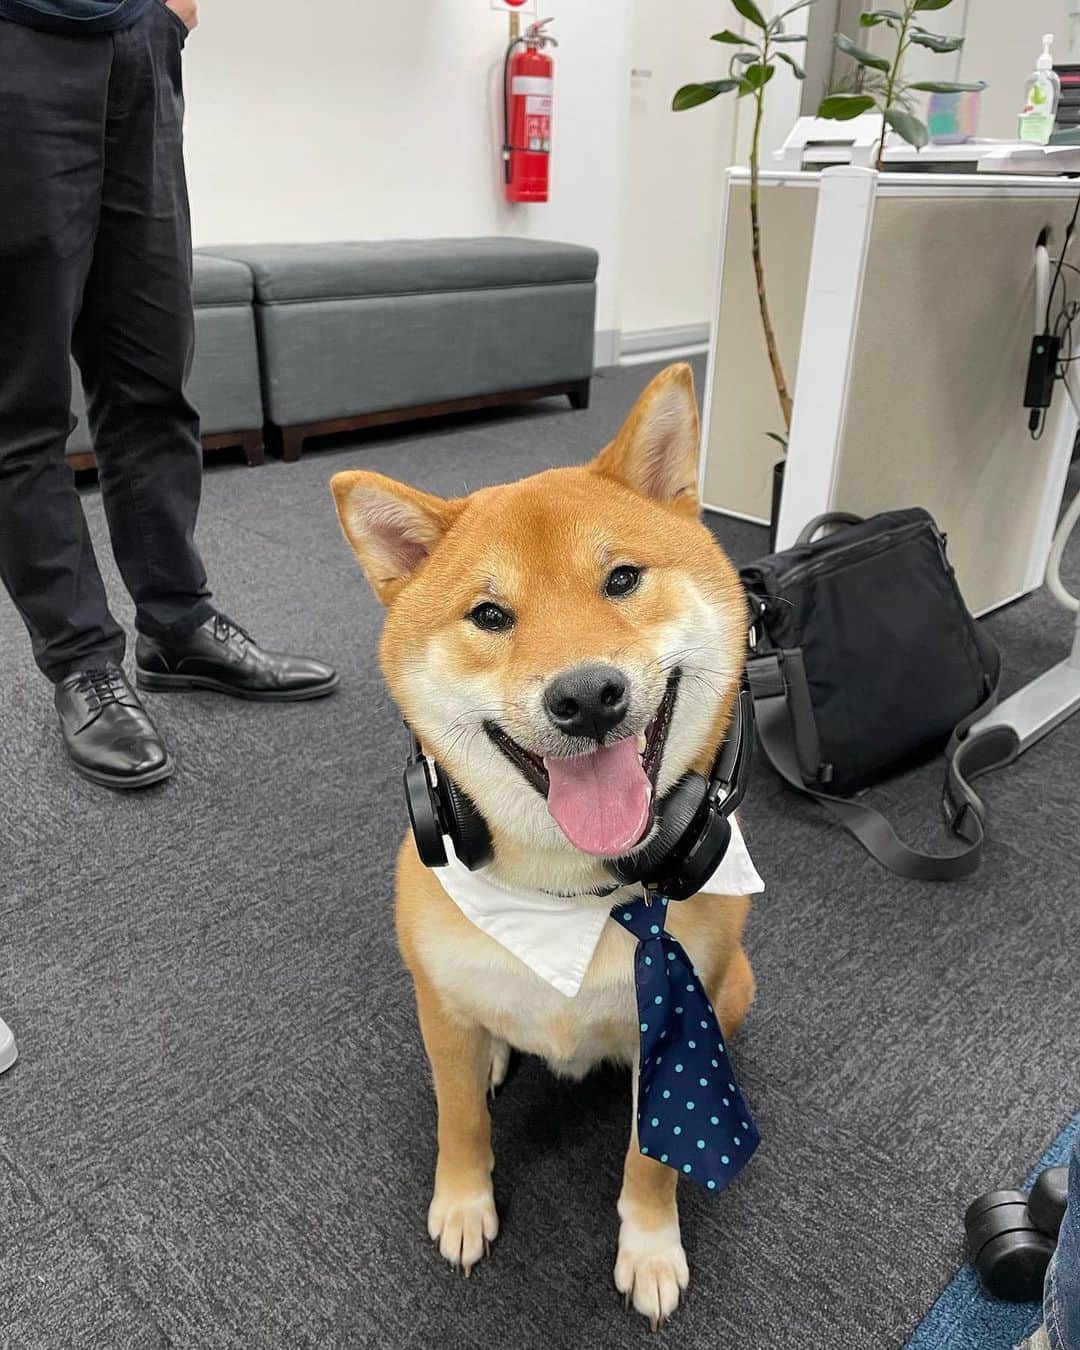 8crapのインスタグラム：「When I say I work like a dog 🐕 Happy Take Your Dog to Work Day! - 📷 @thechikishiba - #️⃣ Hashtag #BarkedDogAtWork on videos/photos of your dog at work (Work from home counts too!) to share with us! - #barked #NationalTakeYourDogToWorkDay #TakeYourDogToWorkDay #dog #doggo #ShibaInu #Shiba」